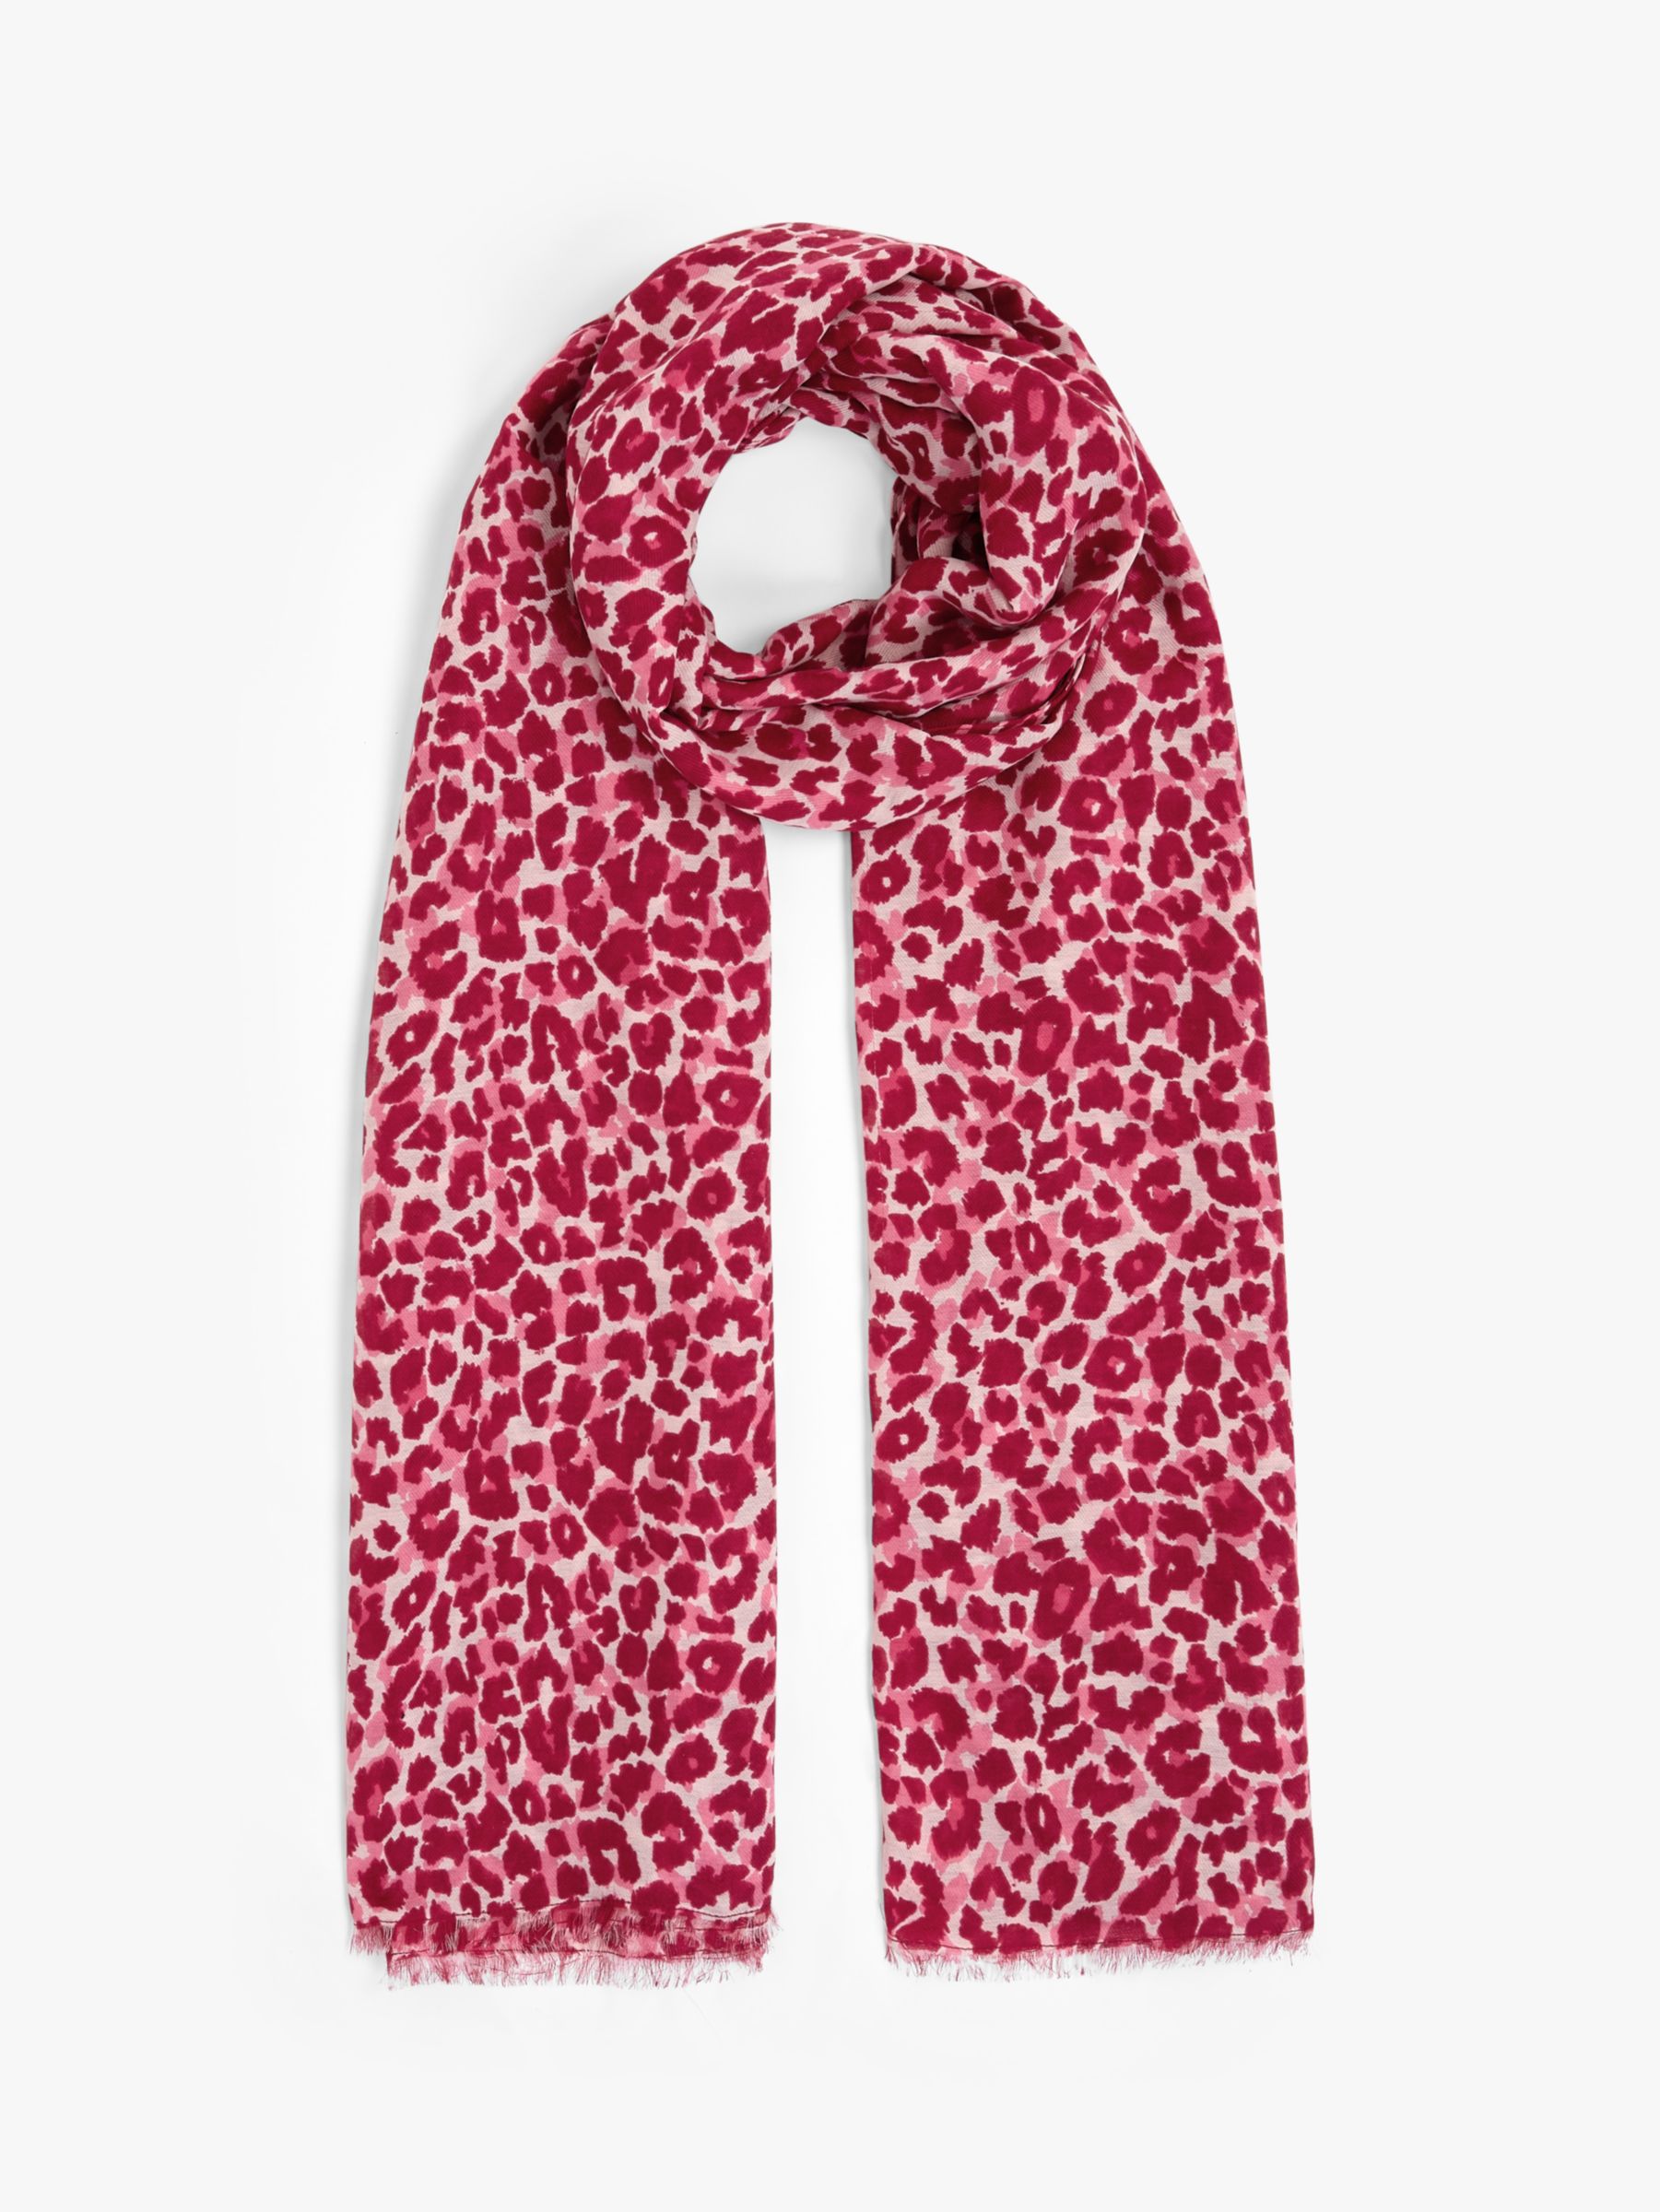 Wired Head Scarf wrap Red John Lewis fabric